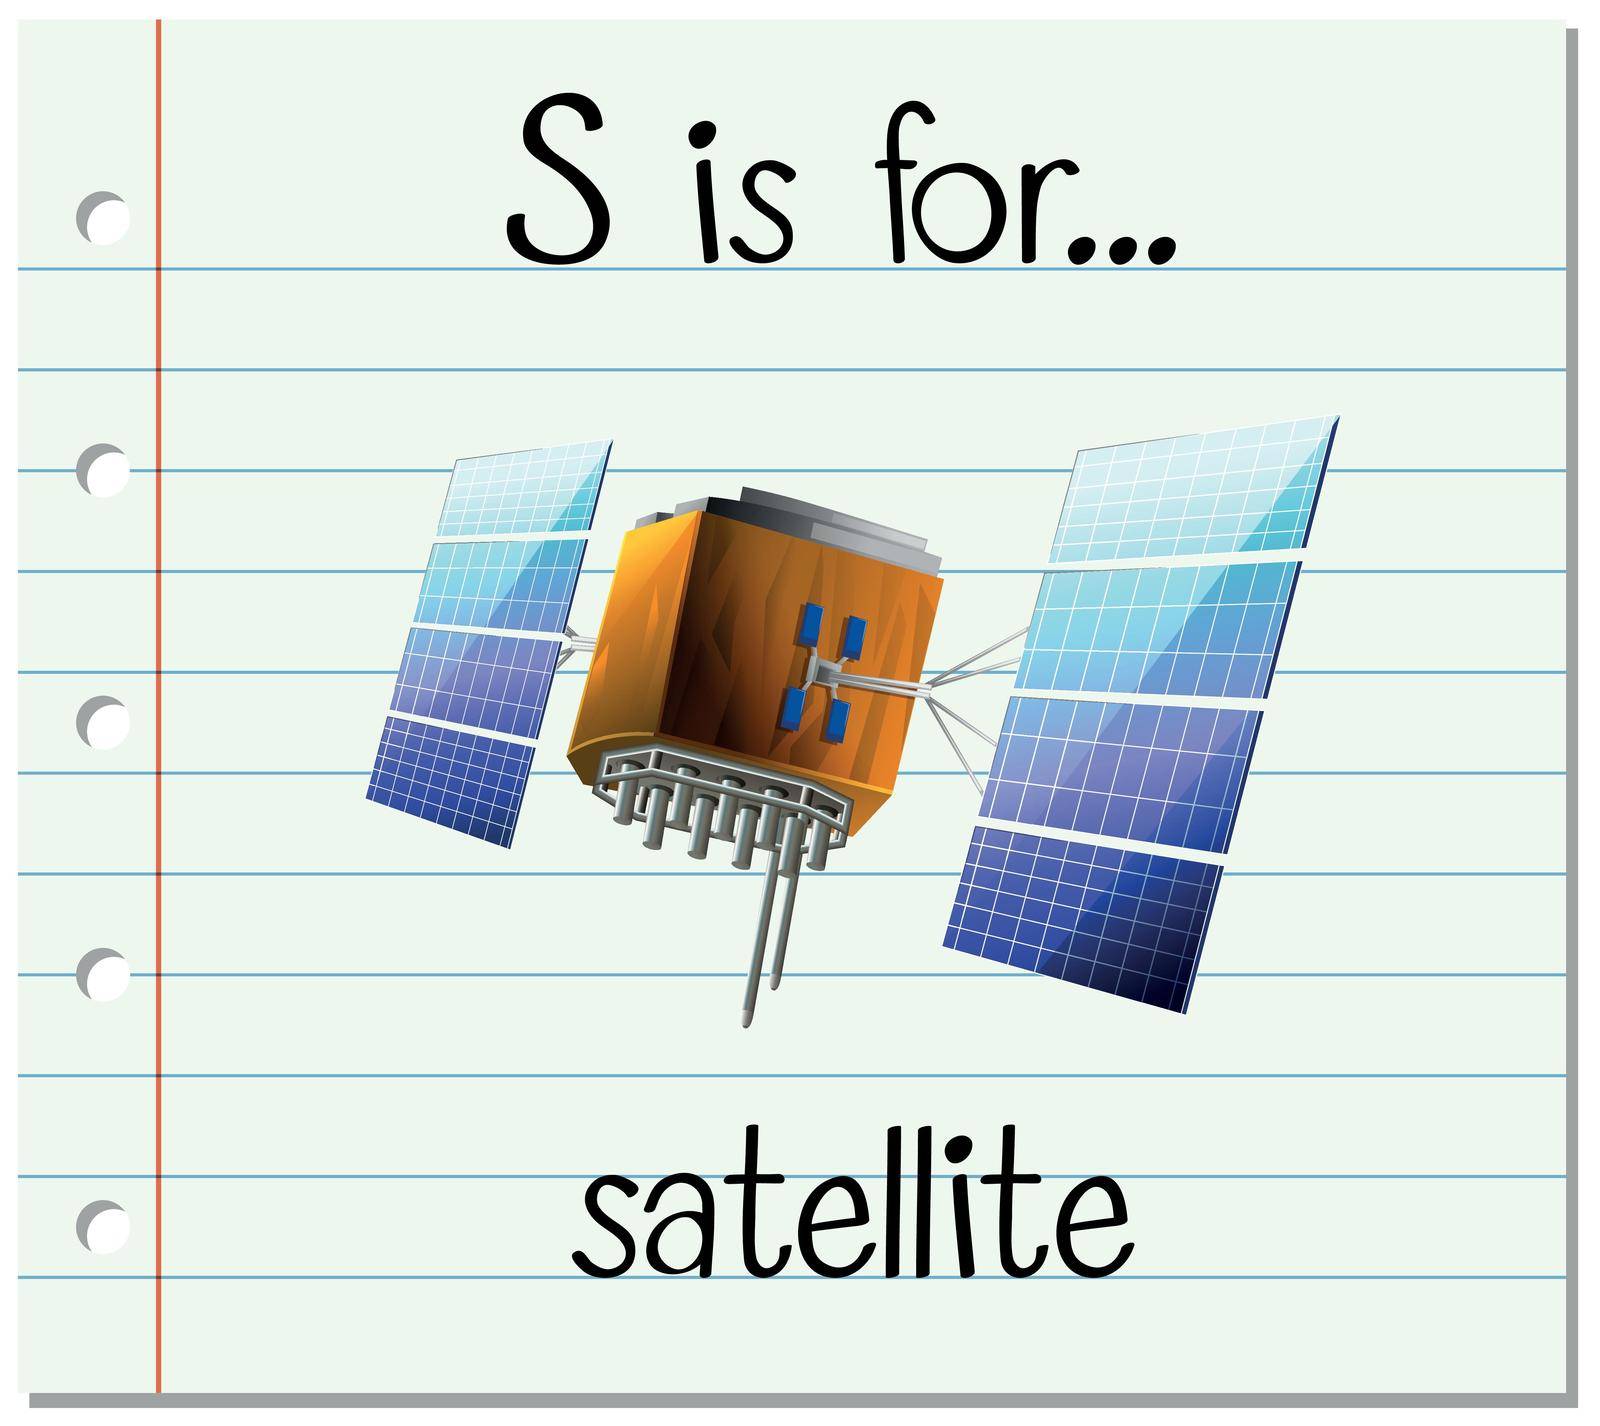 Alphabet S is for satellite by iimages